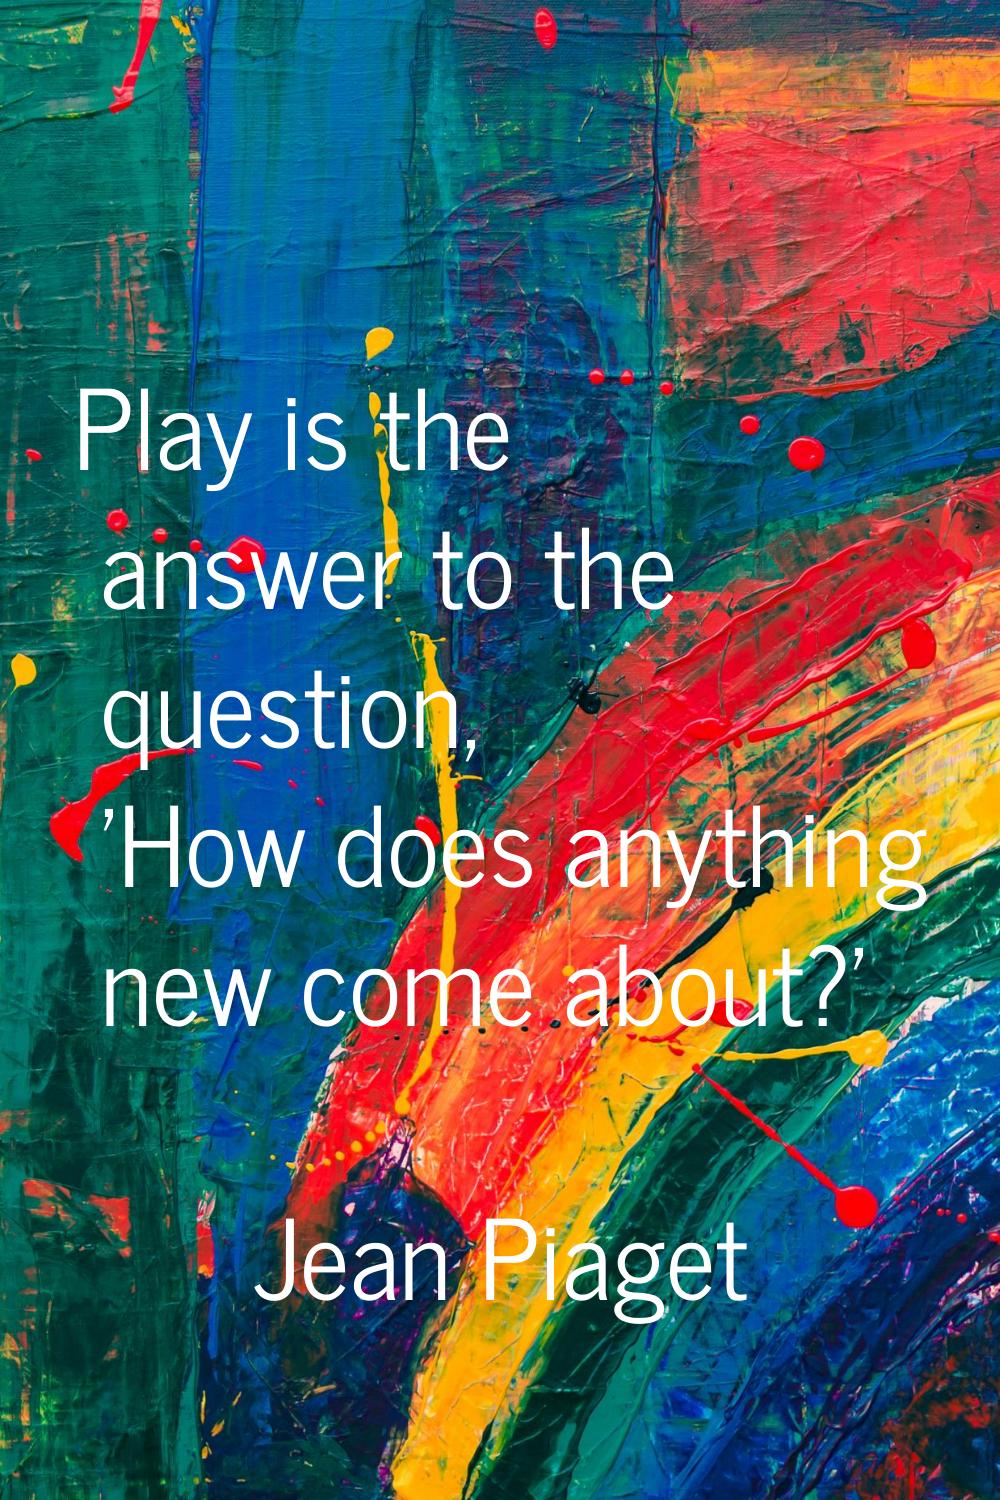 Play is the answer to the question, 'How does anything new come about?'